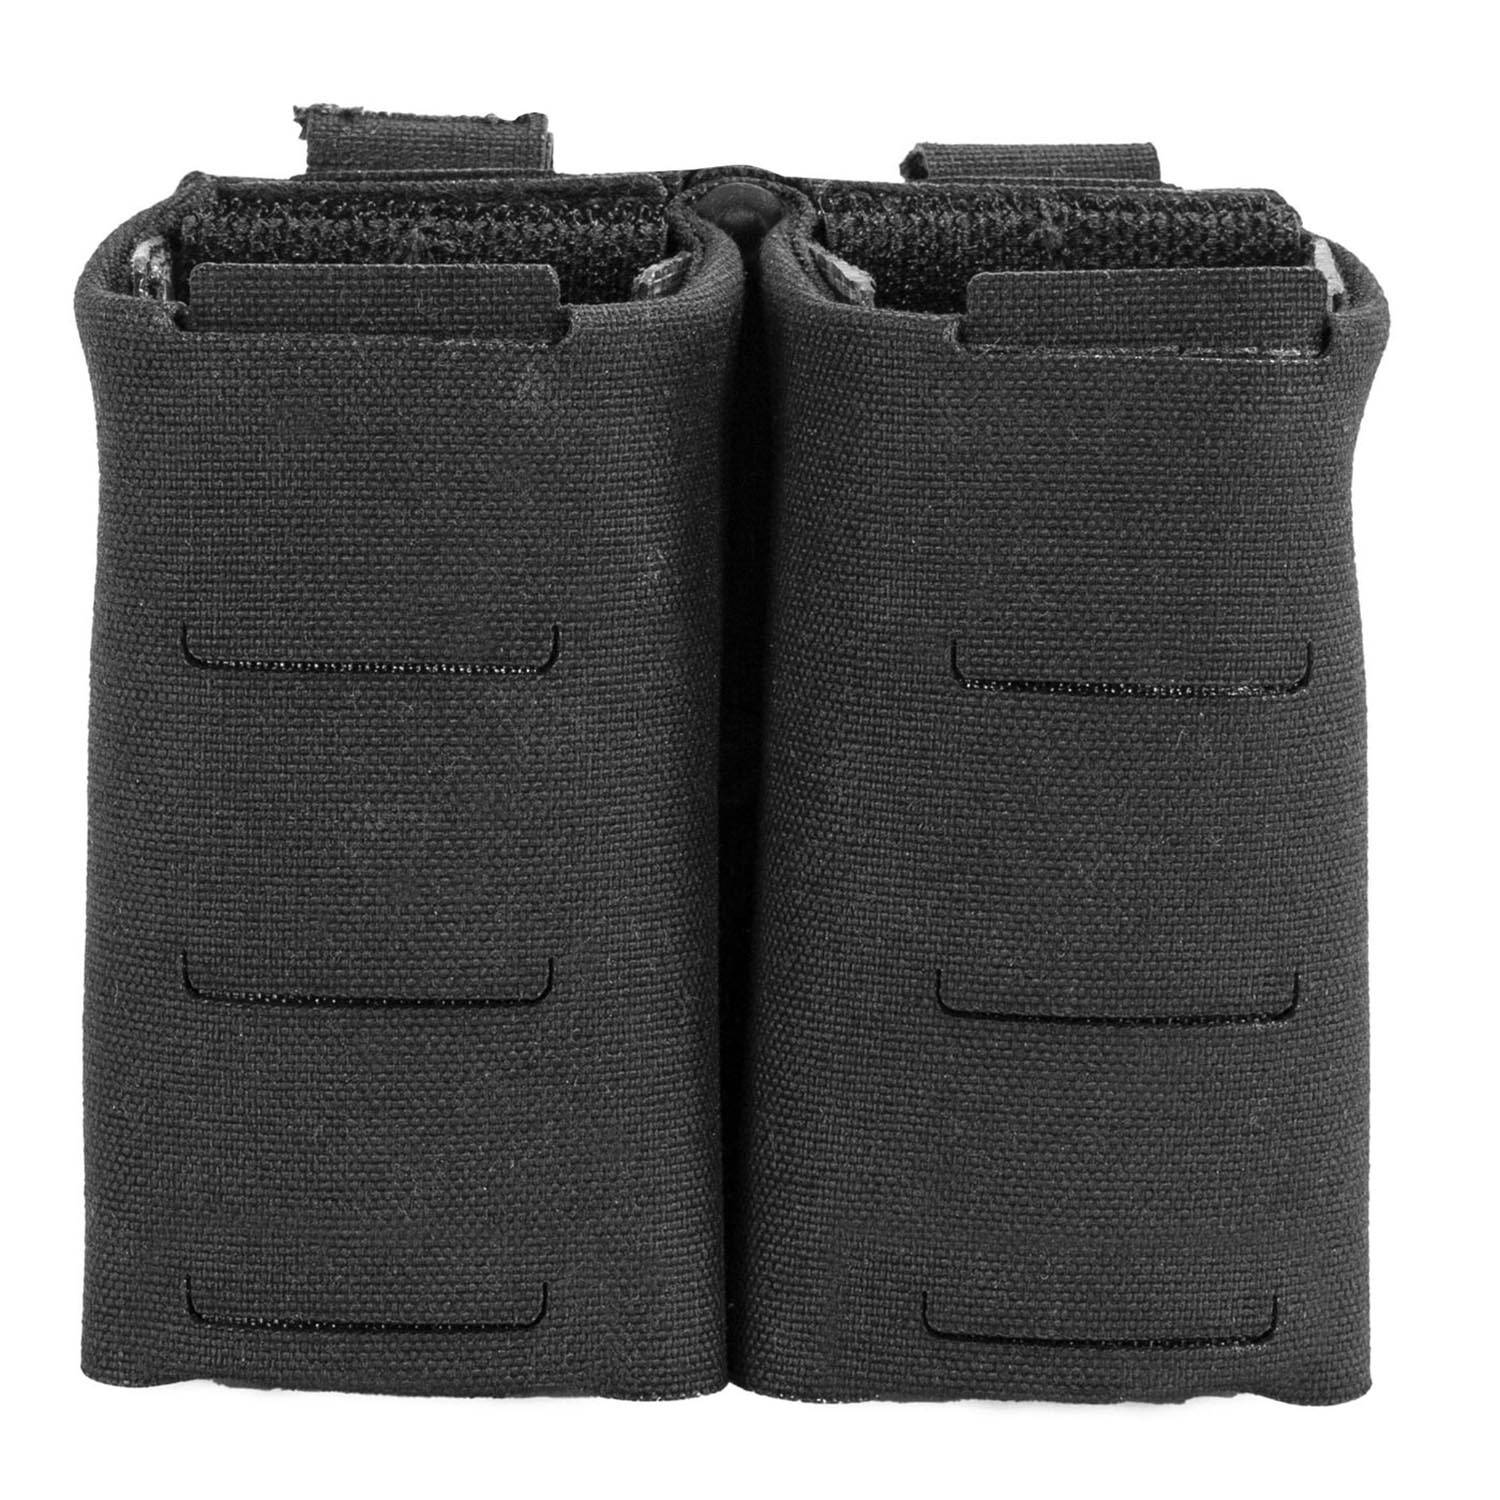 POINT BLANK DOUBLE PISTOL MAG POUCH WITH TANK TRACK